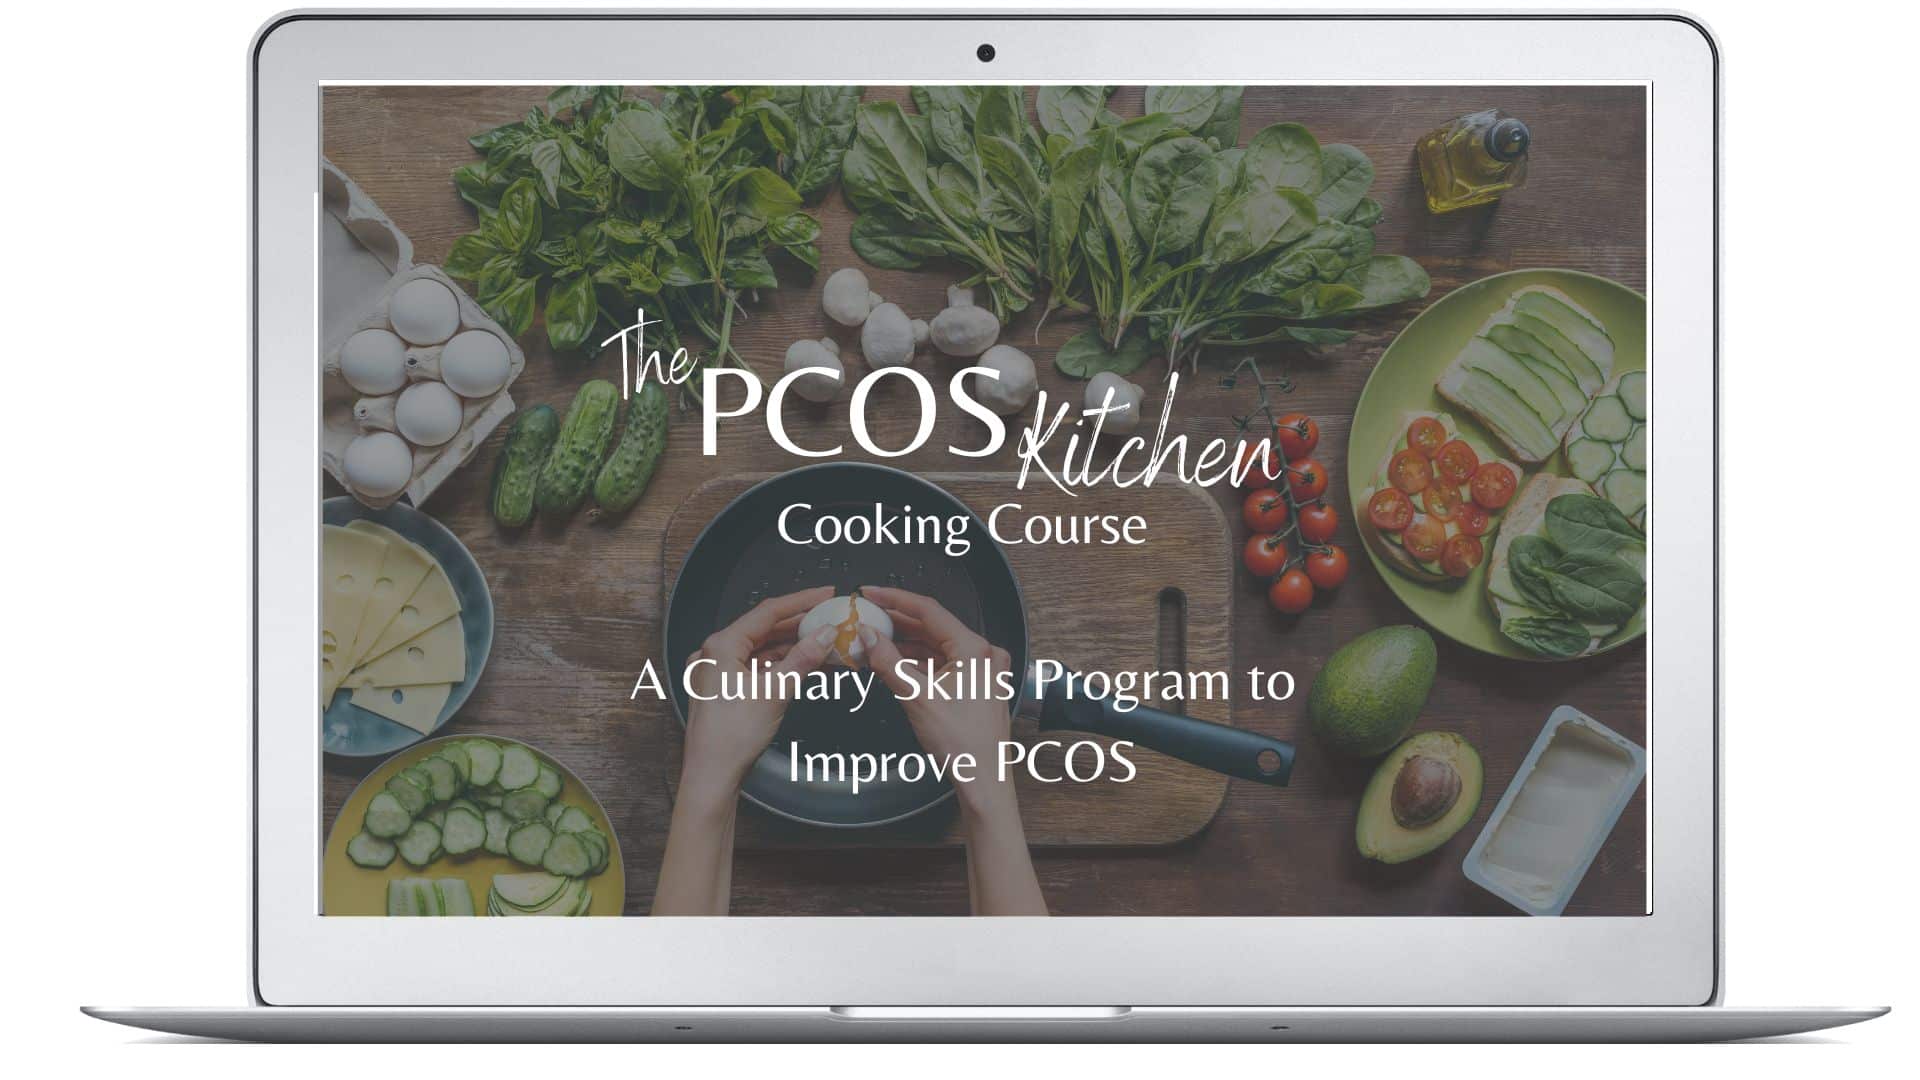 Picture of laptop computer with screen showing the PCOS Kitchen Cooking course